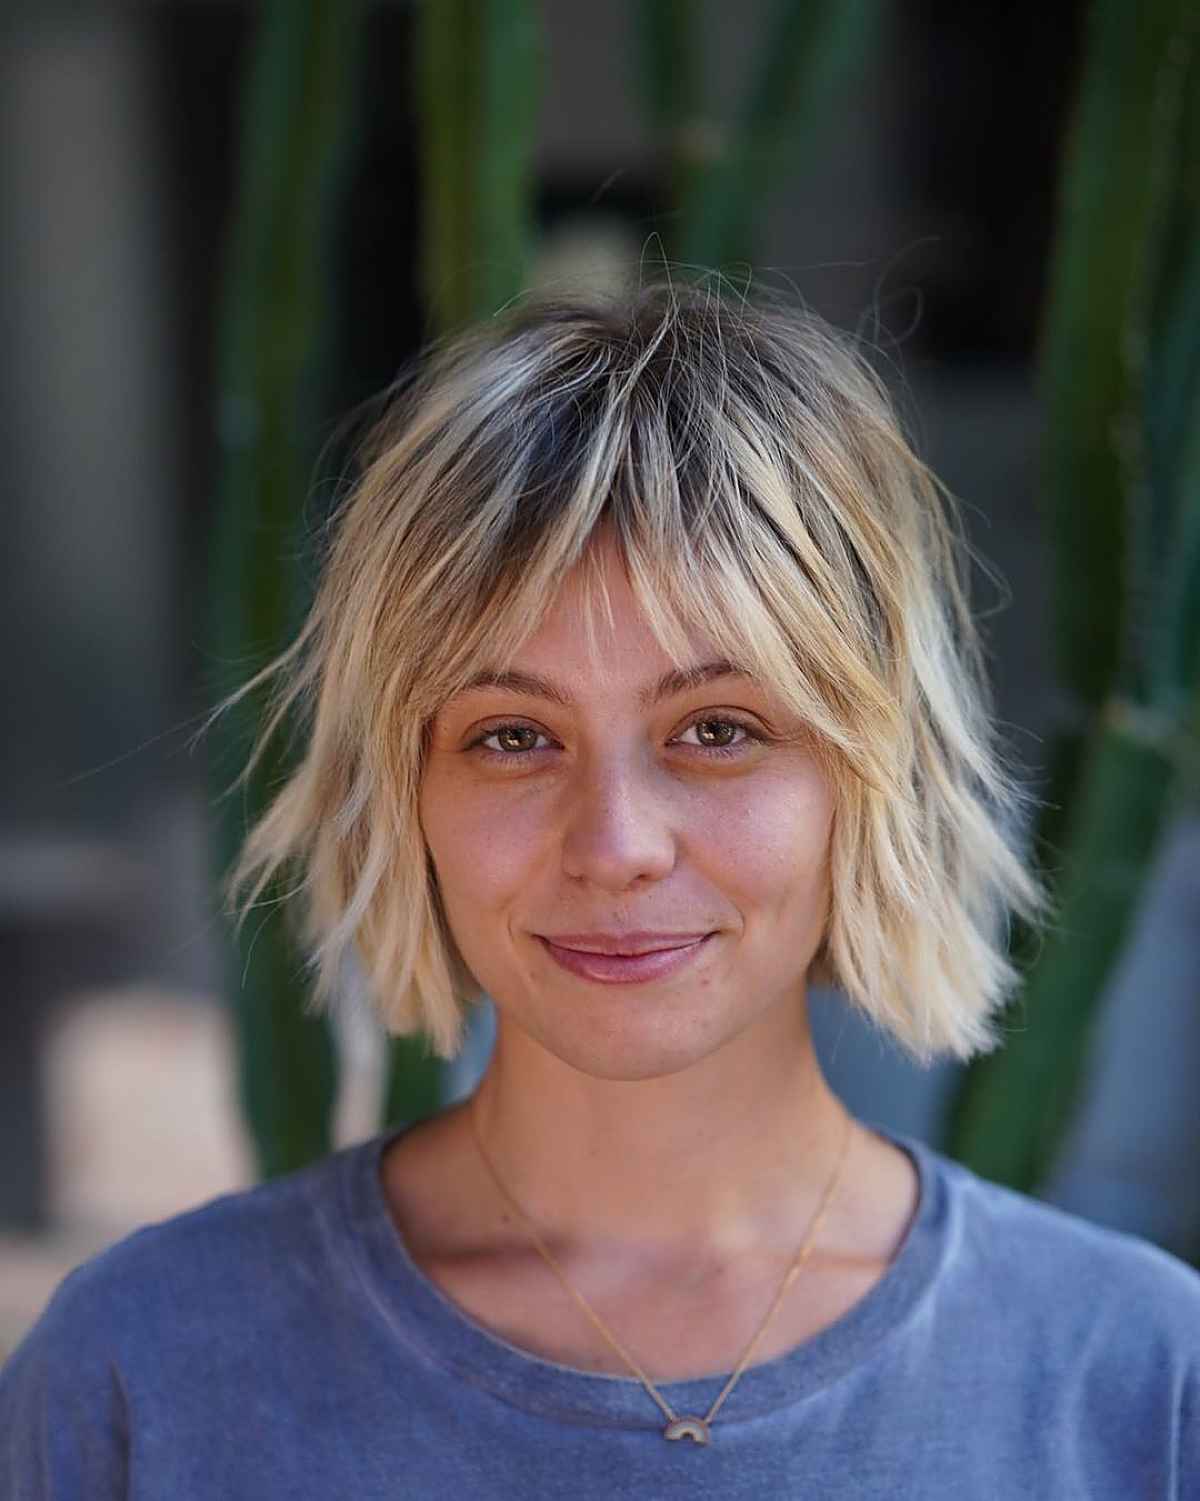 Short hair with bangs for square faces